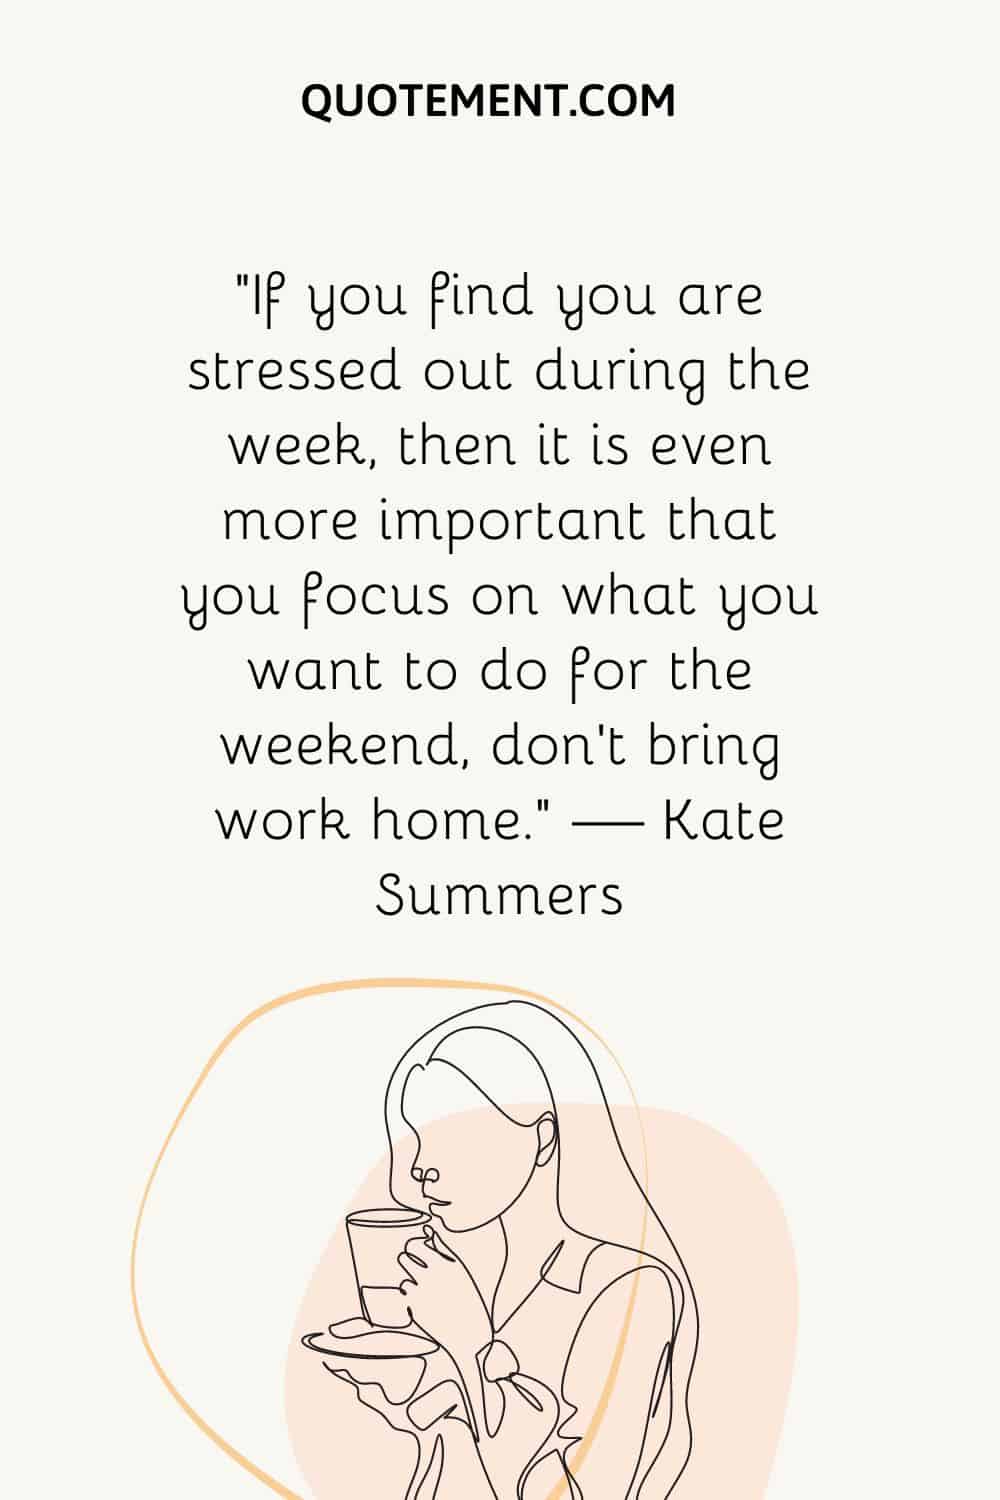 “If you find you are stressed out during the week, then it is even more important that you focus on what you want to do for the weekend, don’t bring work home.” — Kate Summers